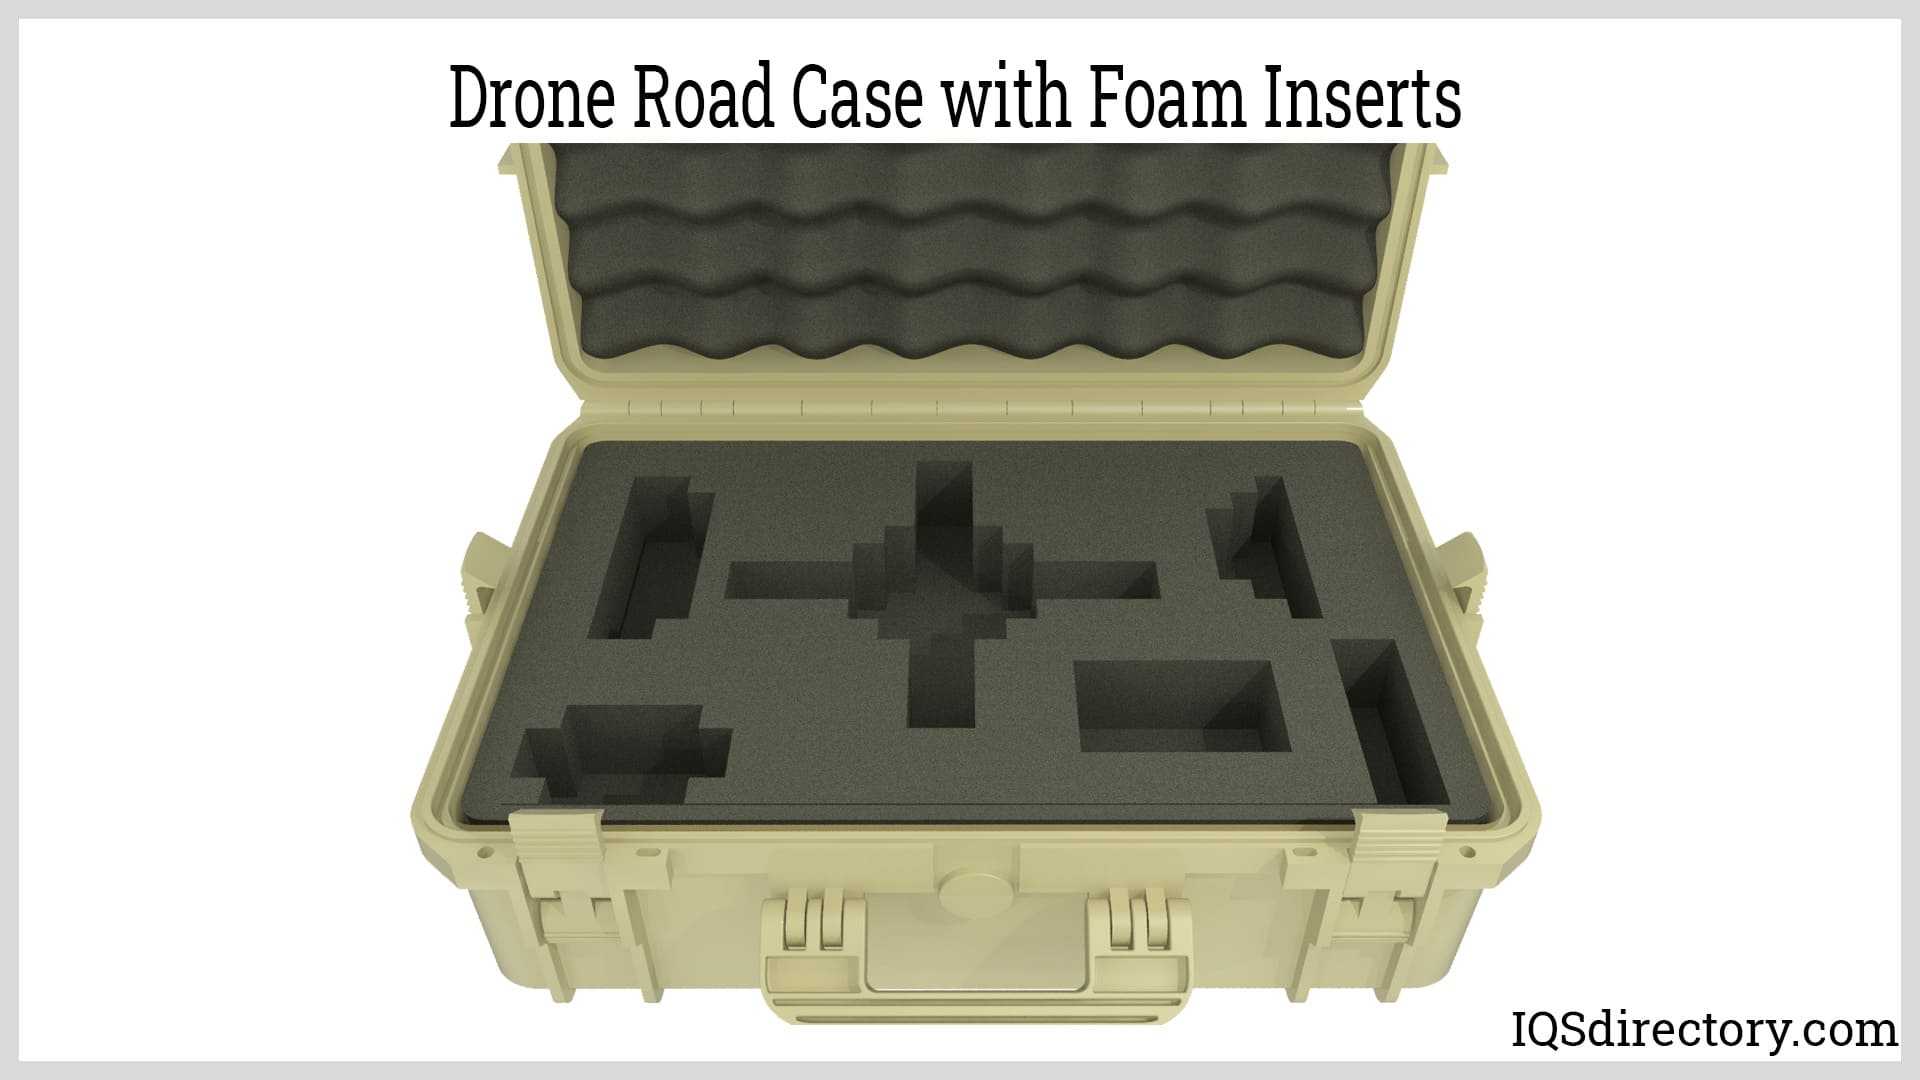 Drone Road Case with Foam Inserts